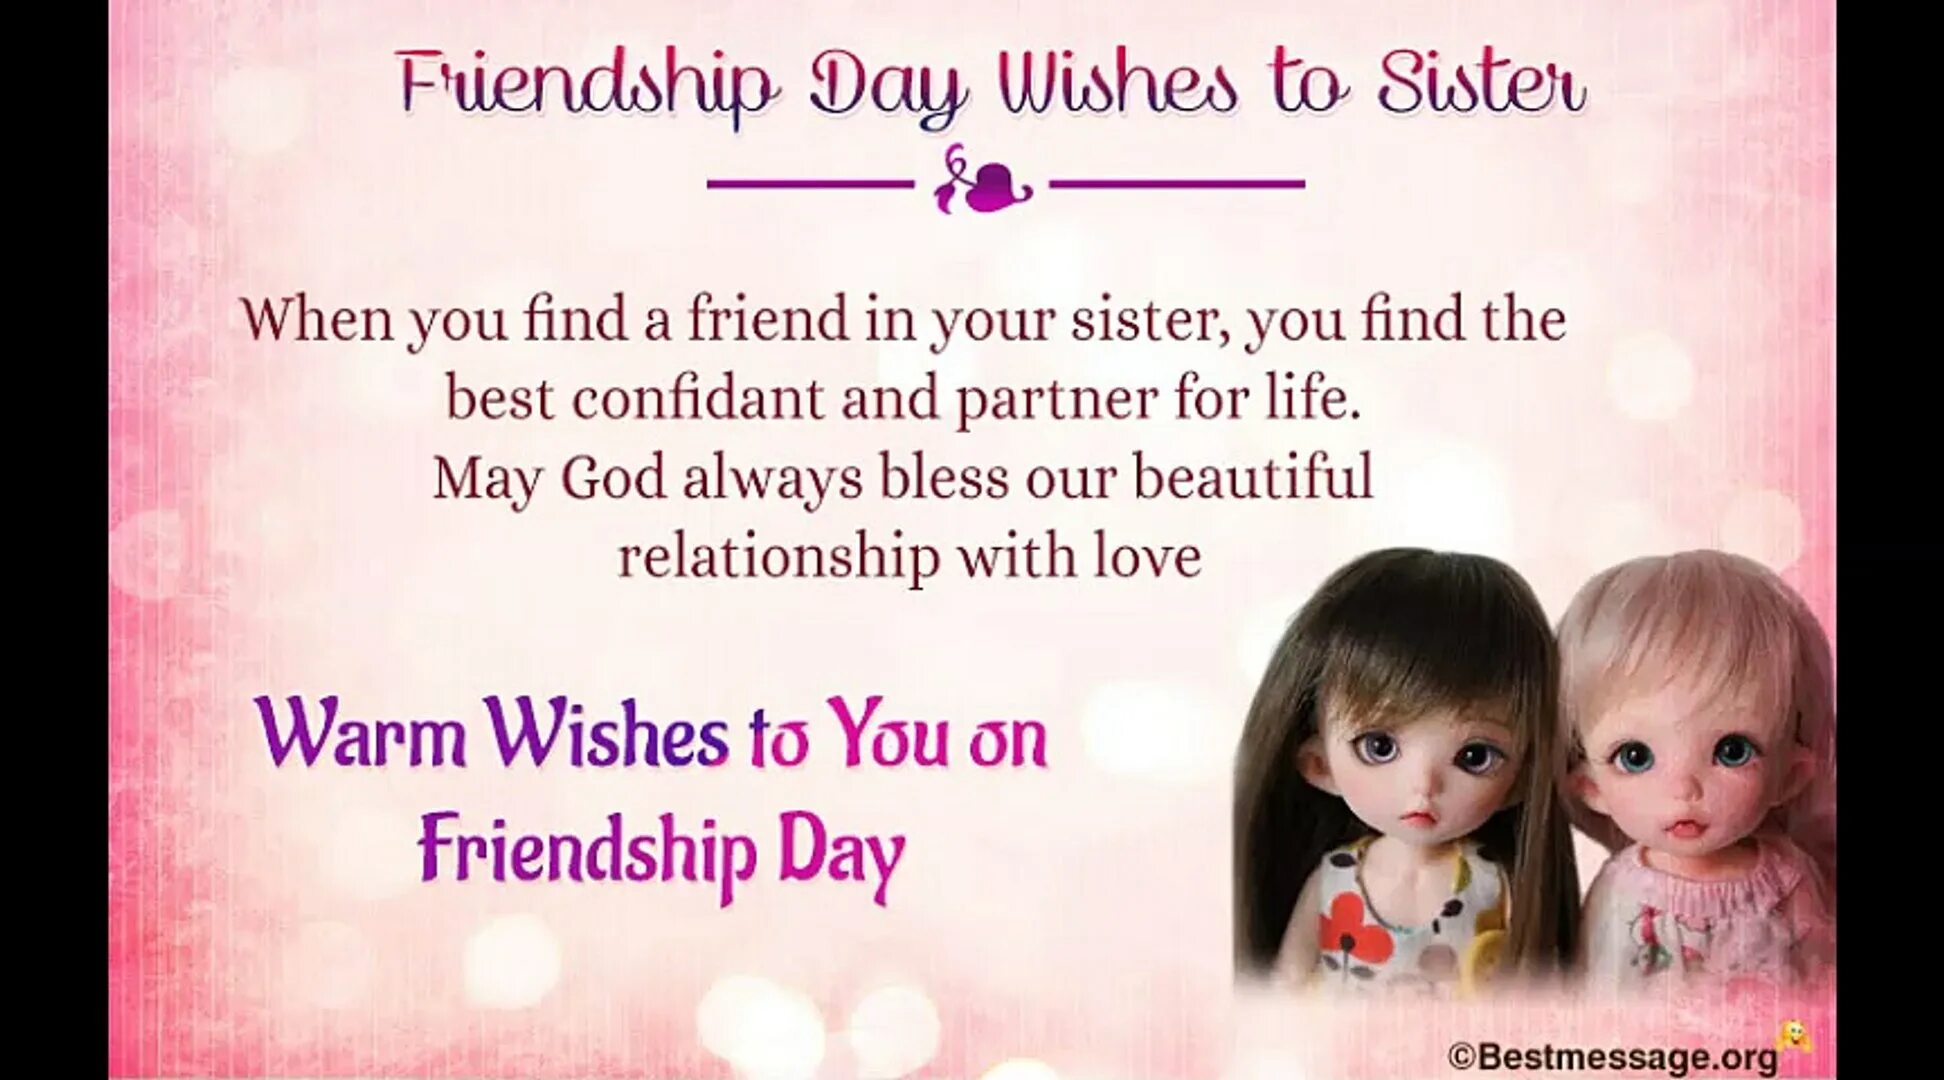 Best friend message. Sister Wish. My friend is Day. Friendship message quotes. Greetings about Friendship.